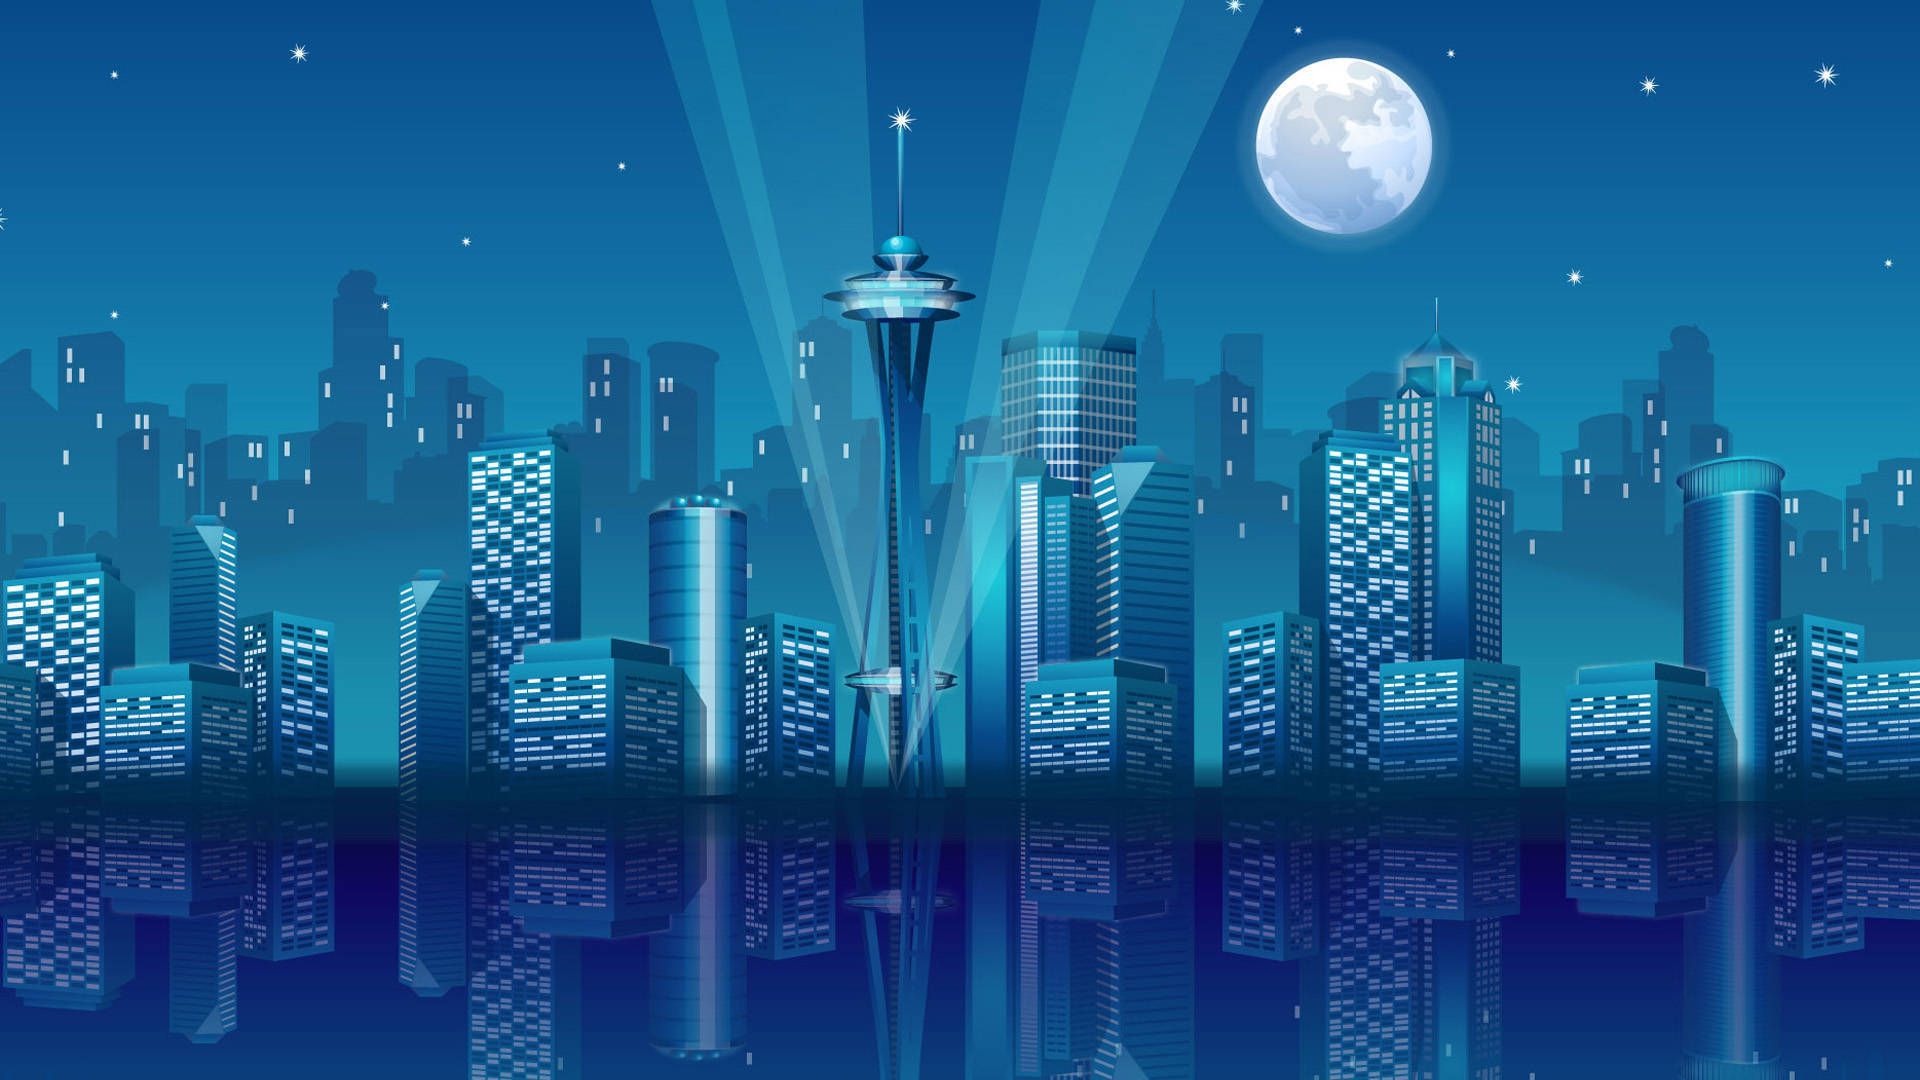 Free download 3D effect of the city wallpapers city wallpapers